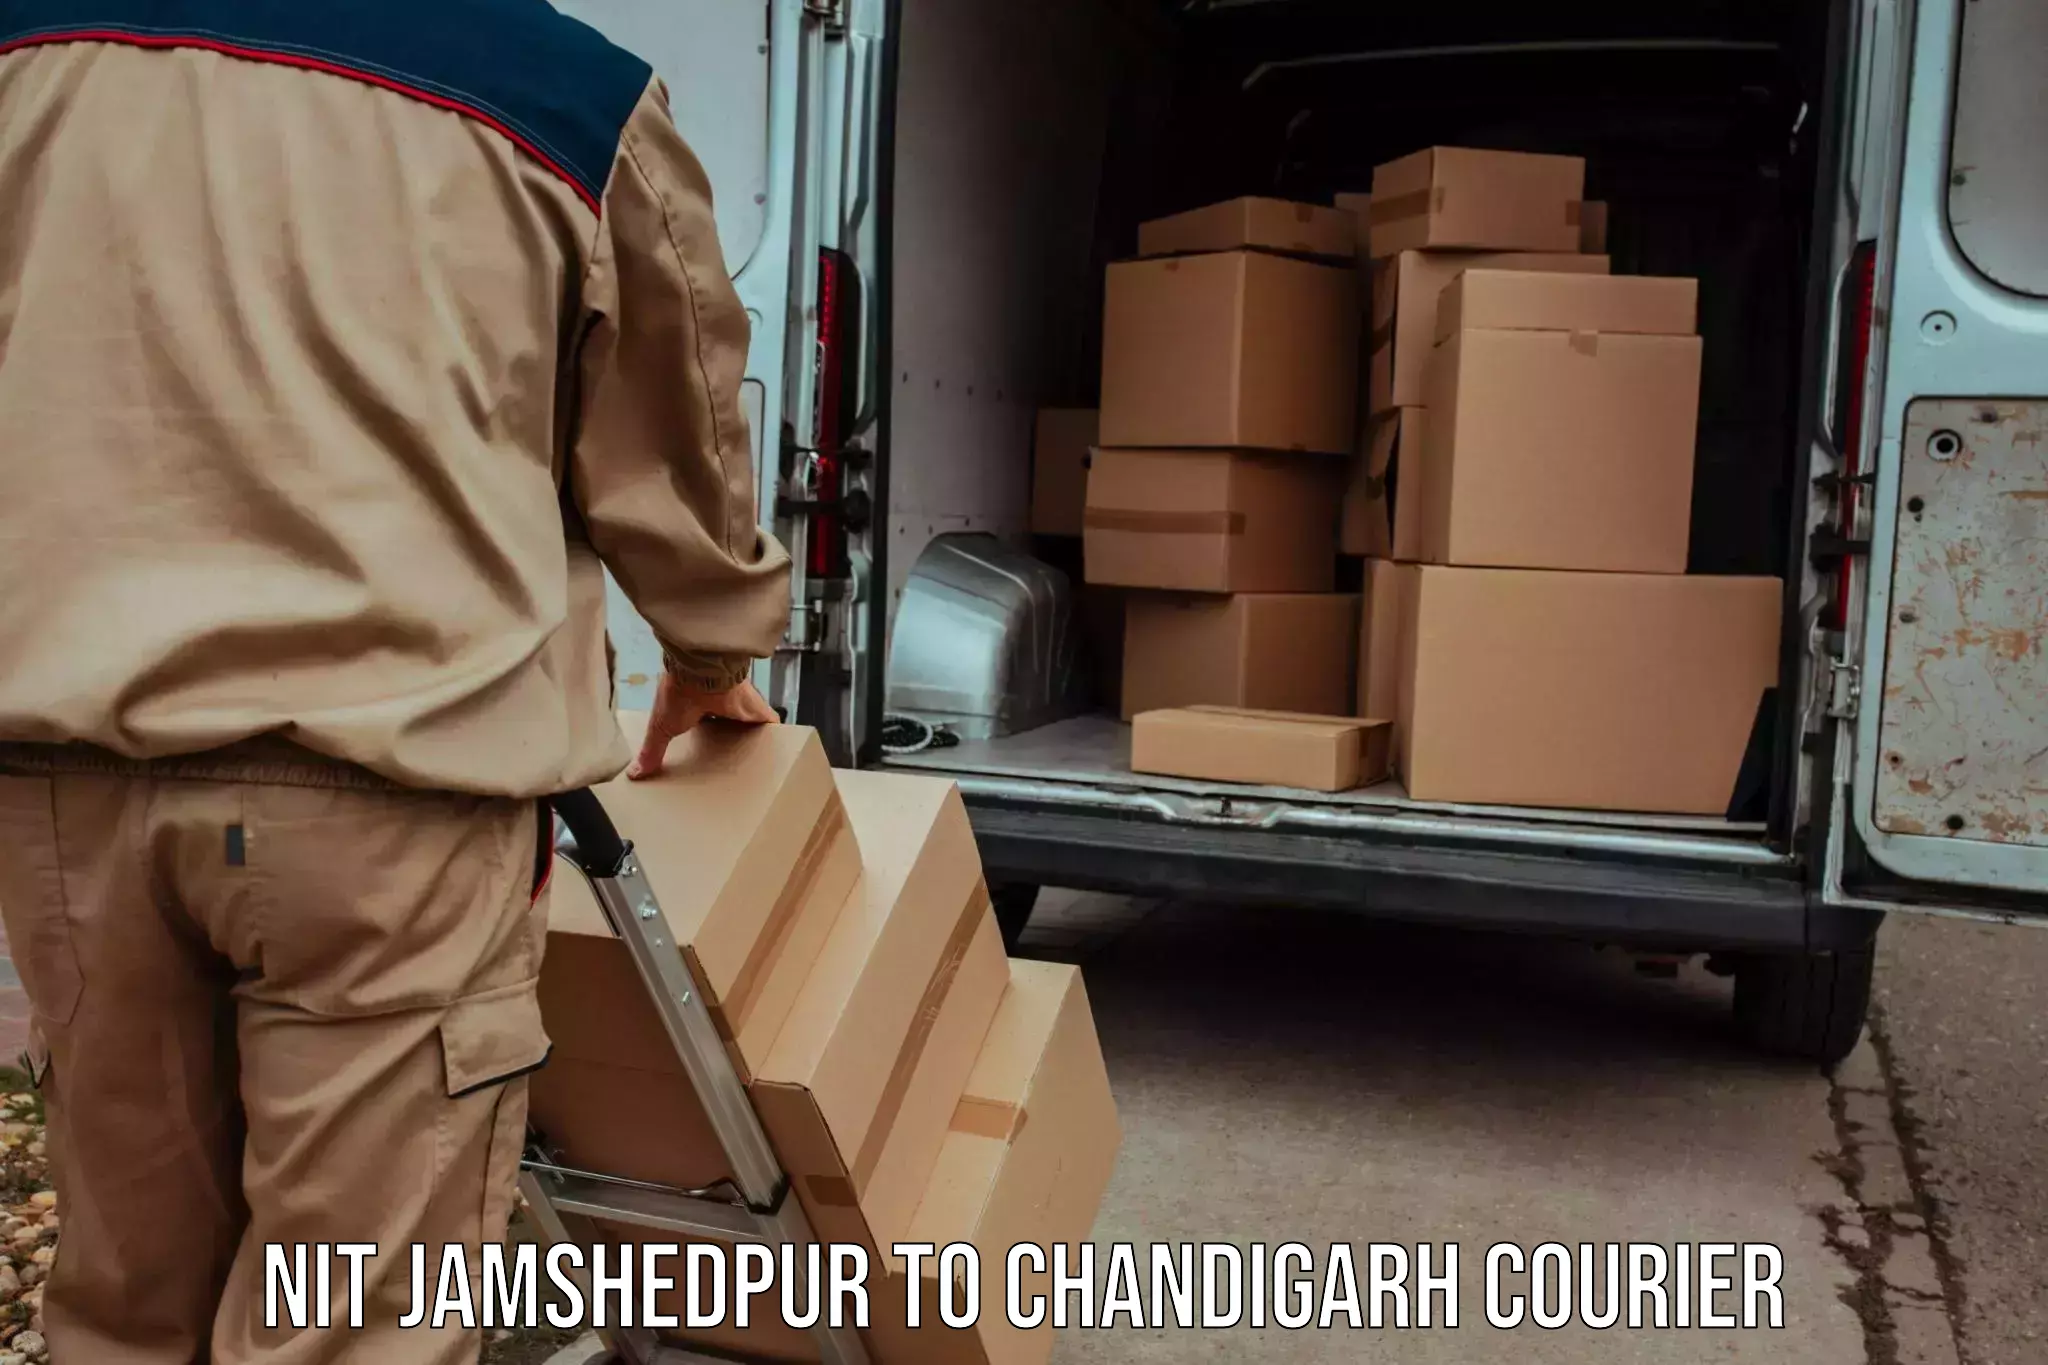 High-speed parcel service NIT Jamshedpur to Chandigarh